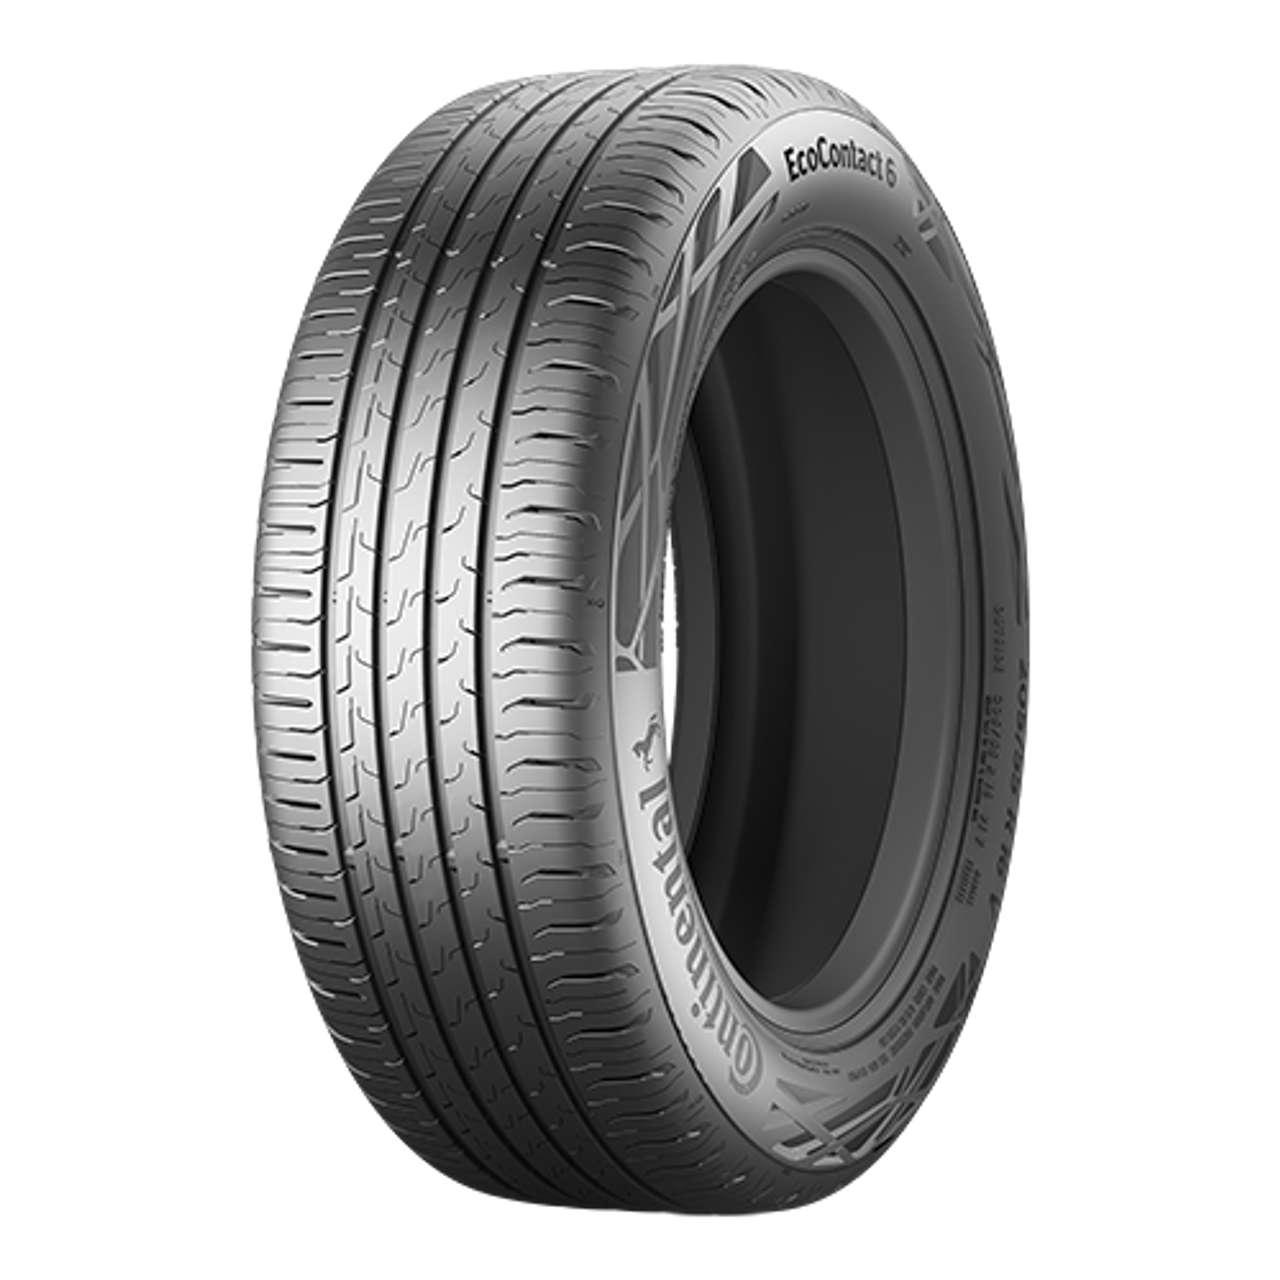 CONTINENTAL ECOCONTACT 6 (MO) (EVc) 205/55R17 91W 